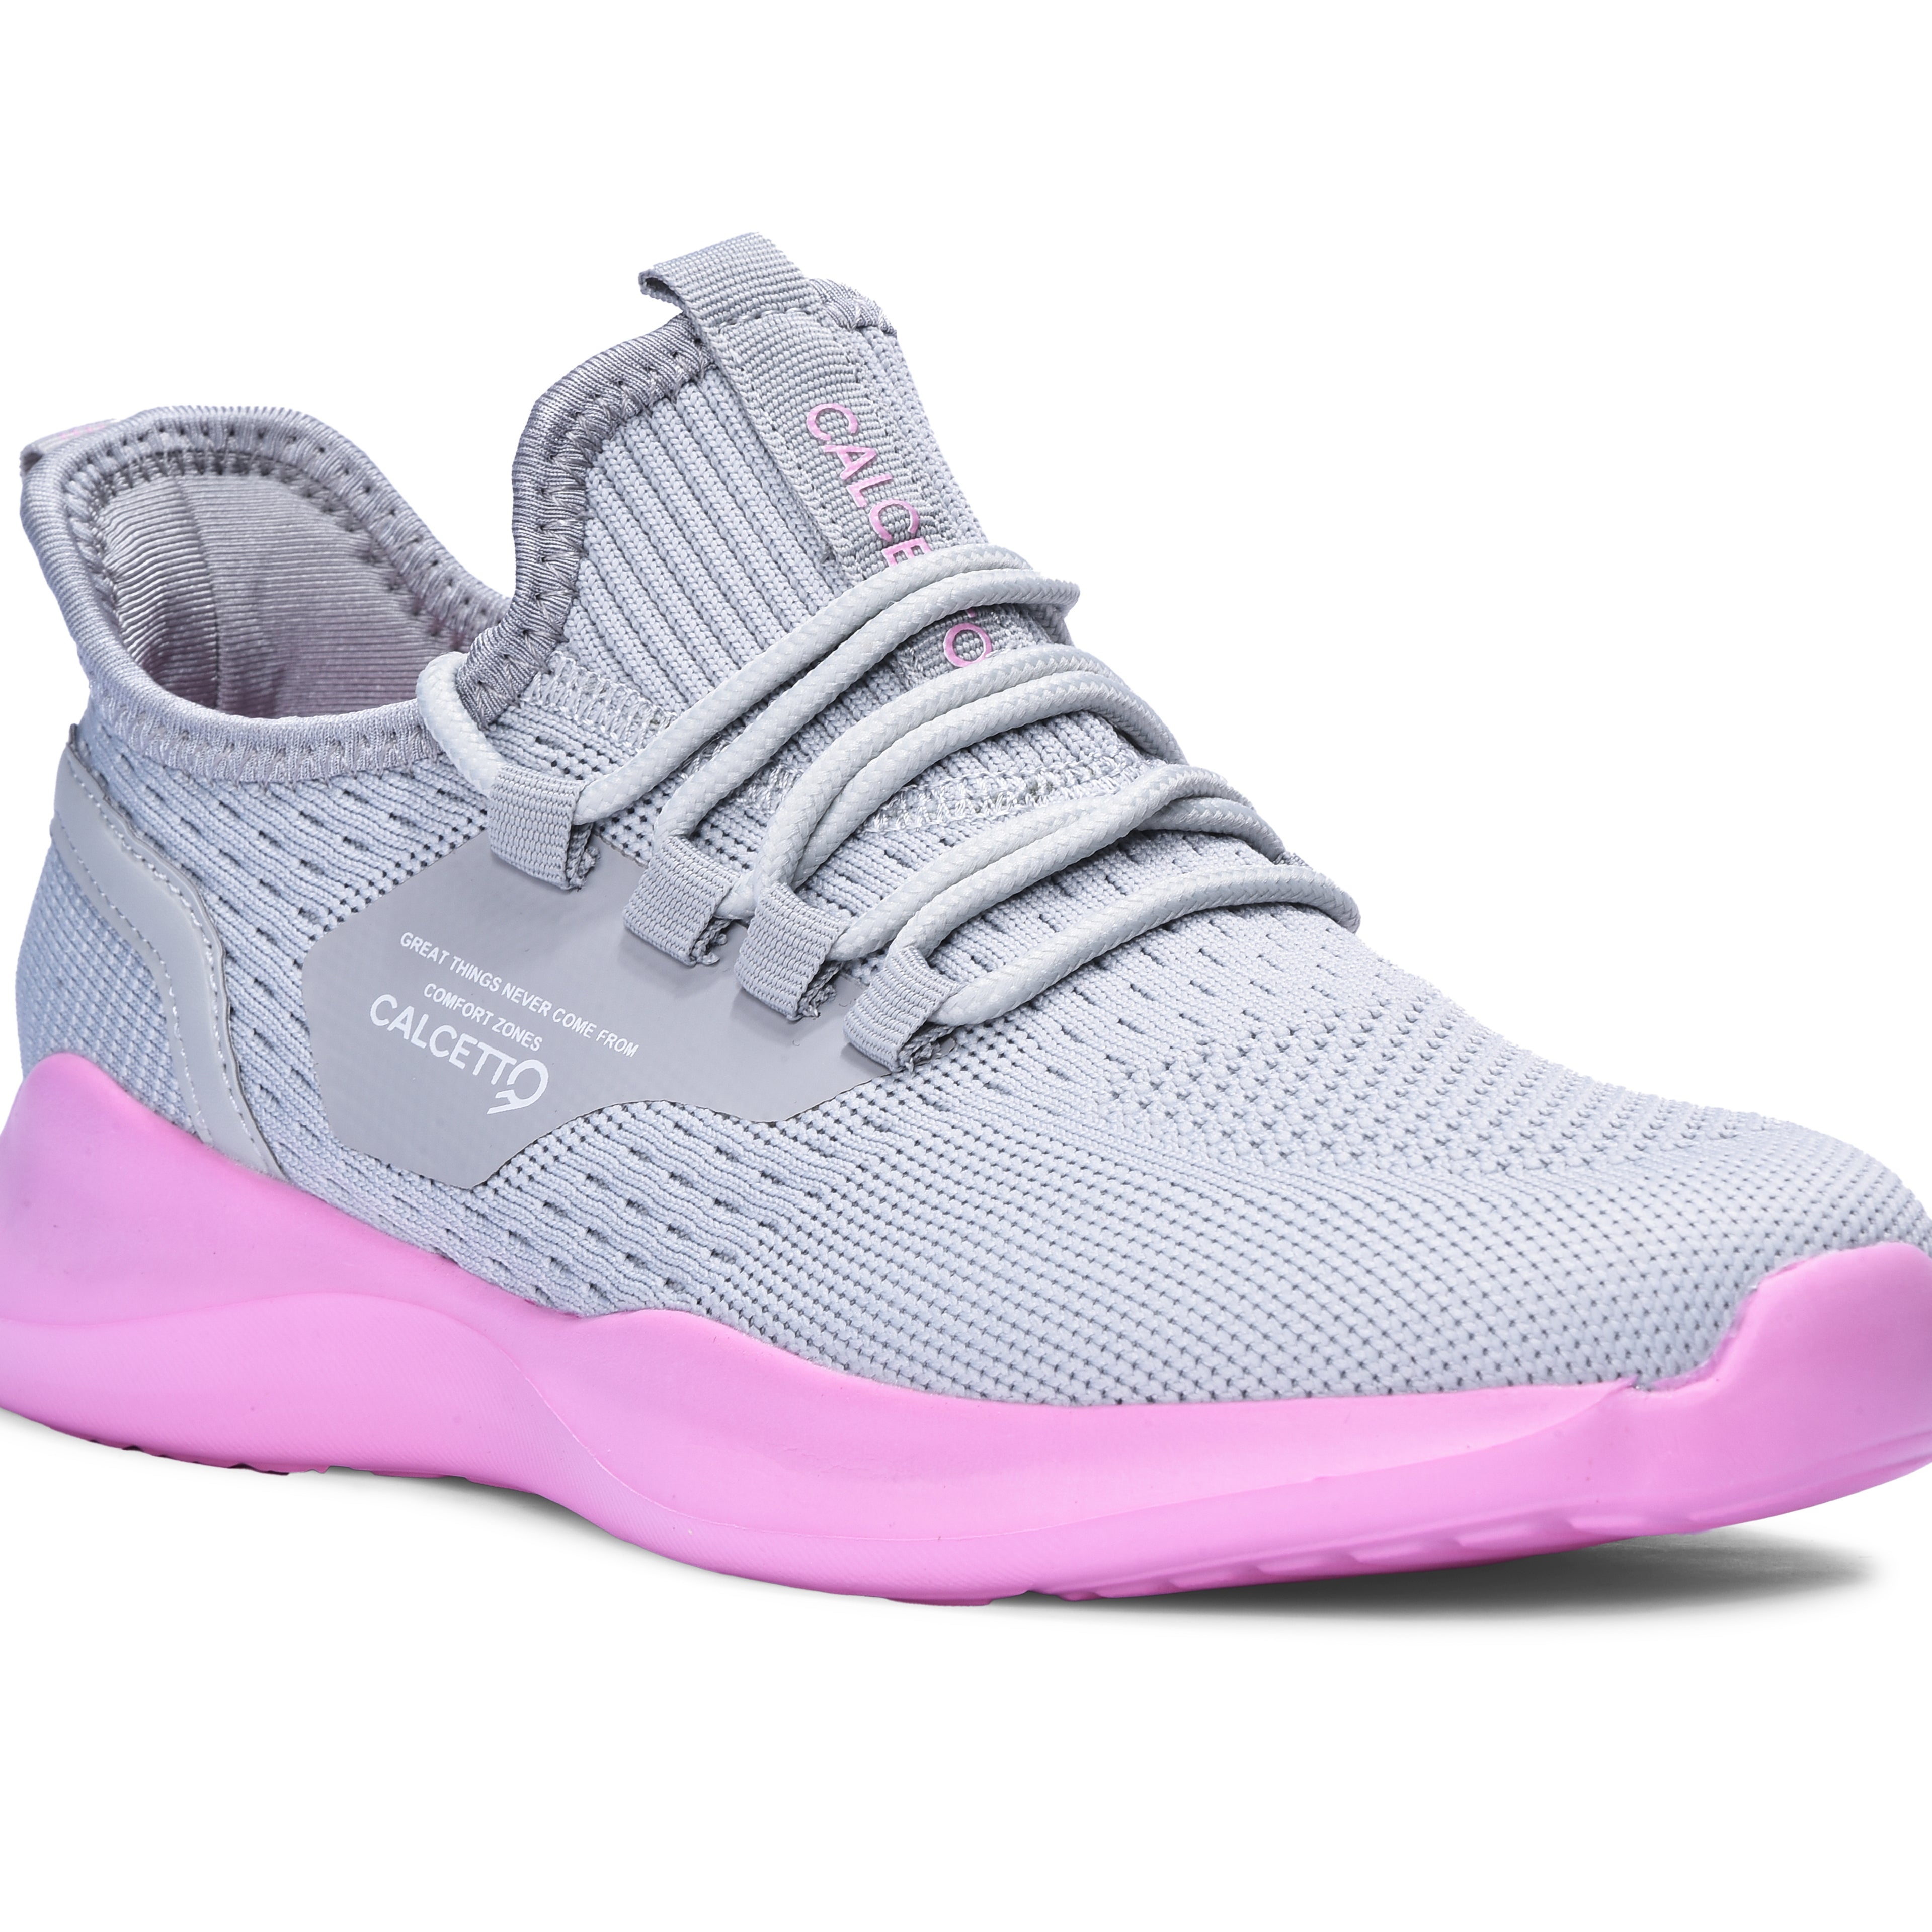 Calcetto CLT-9824 L Grey Pink Casual Shoe For Women